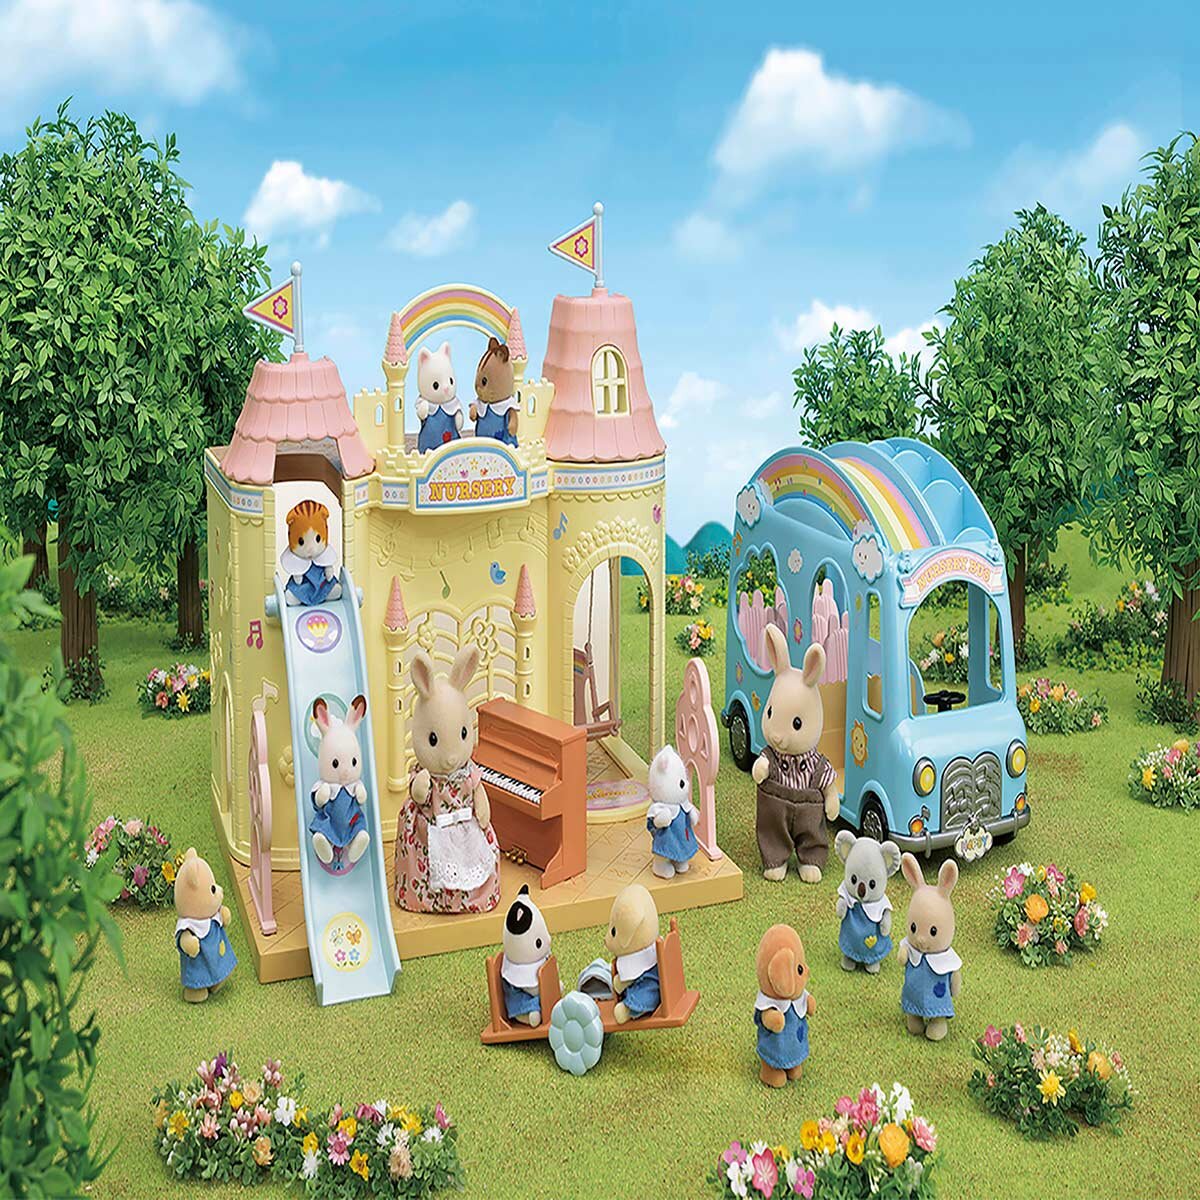 Buy Sylvanian Baby Castle Nursery Overview2 Image at Costco.co.uk